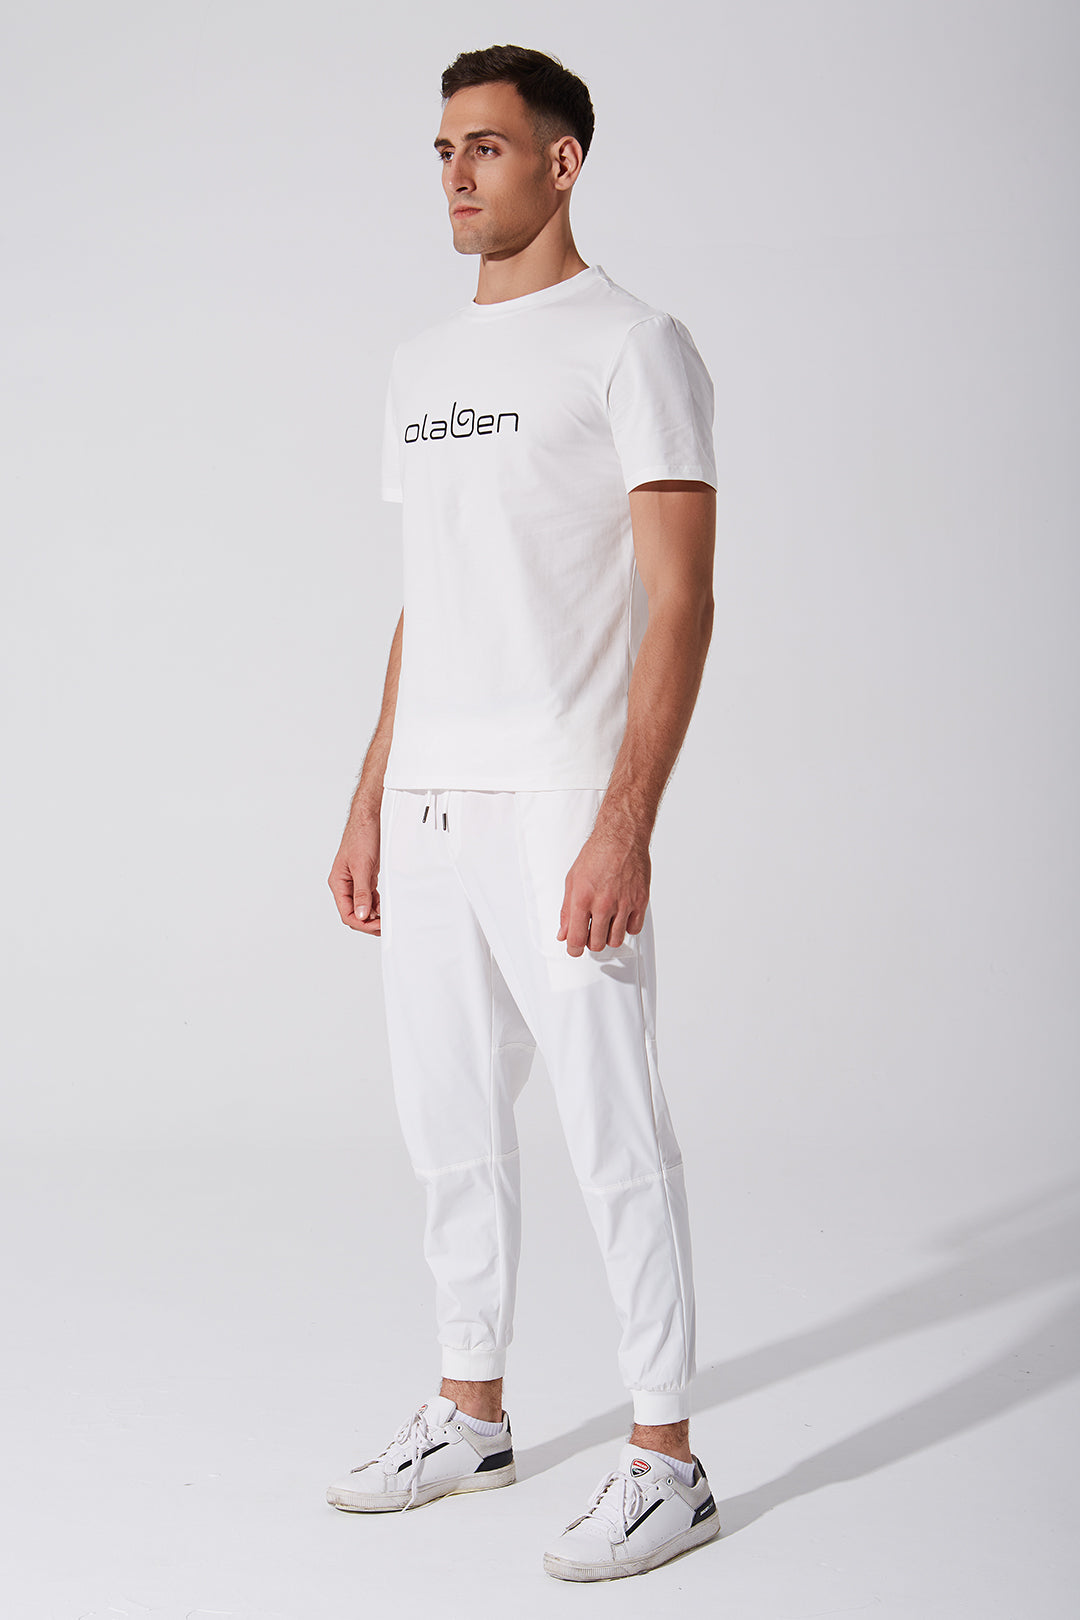 Unisex white short sleeve tee for men, OW-0176-MSS-WT, available in size 2.